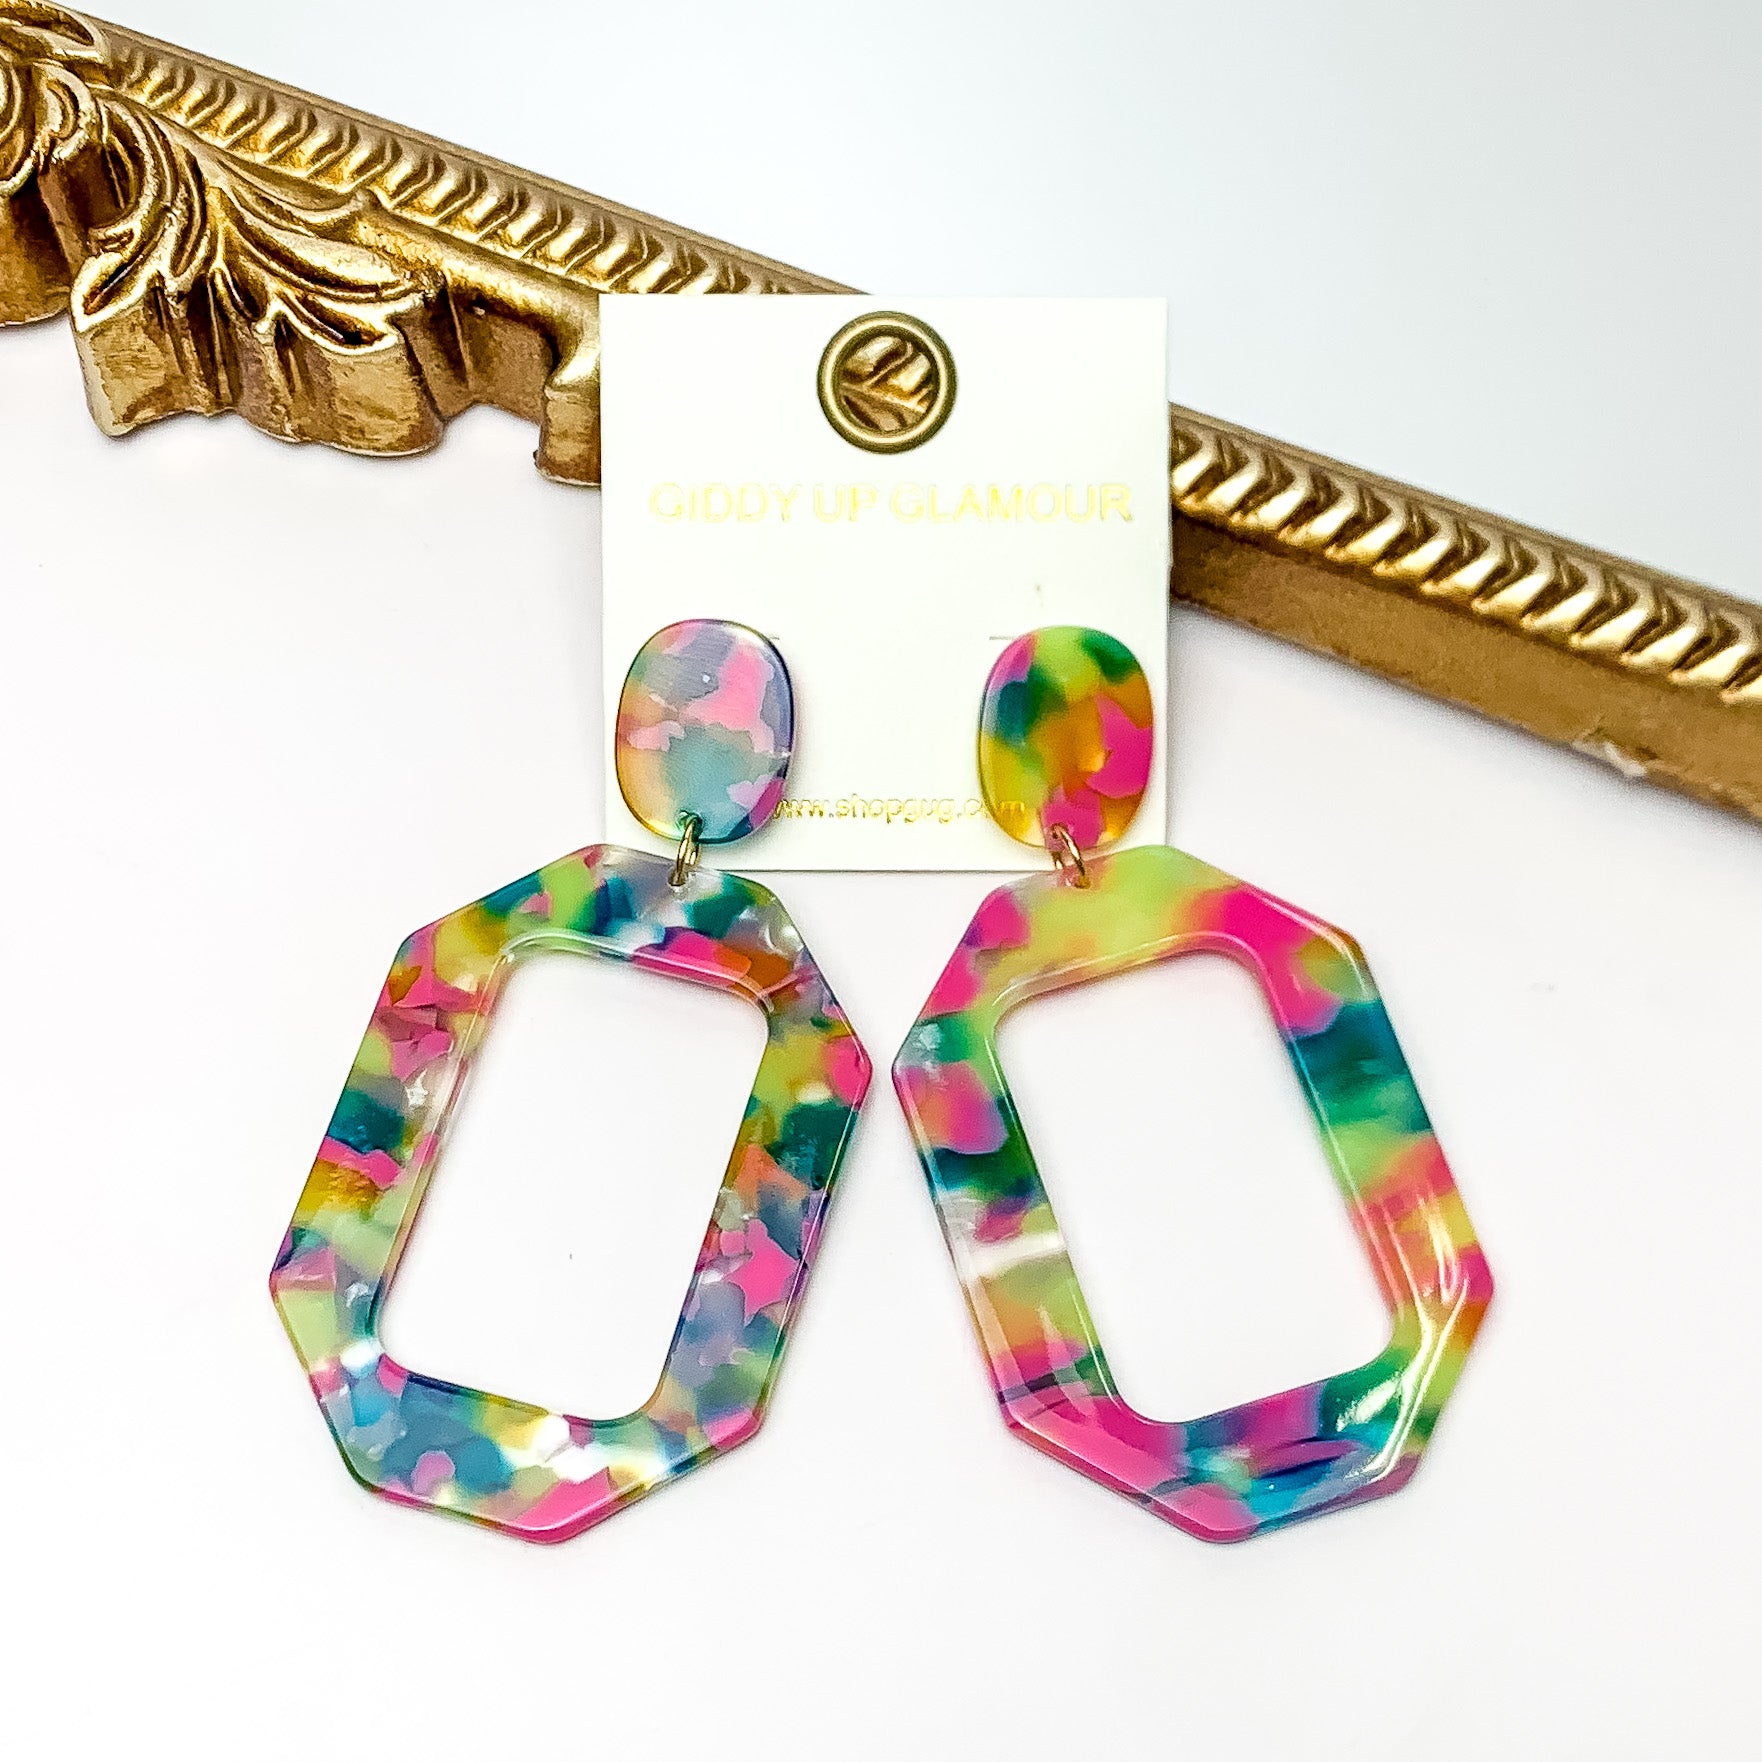 Malibu Marble Open Rectangle Earrings in Pink and Green Multicolor. Pictured on a white background with the earrings laying on a gold frame.